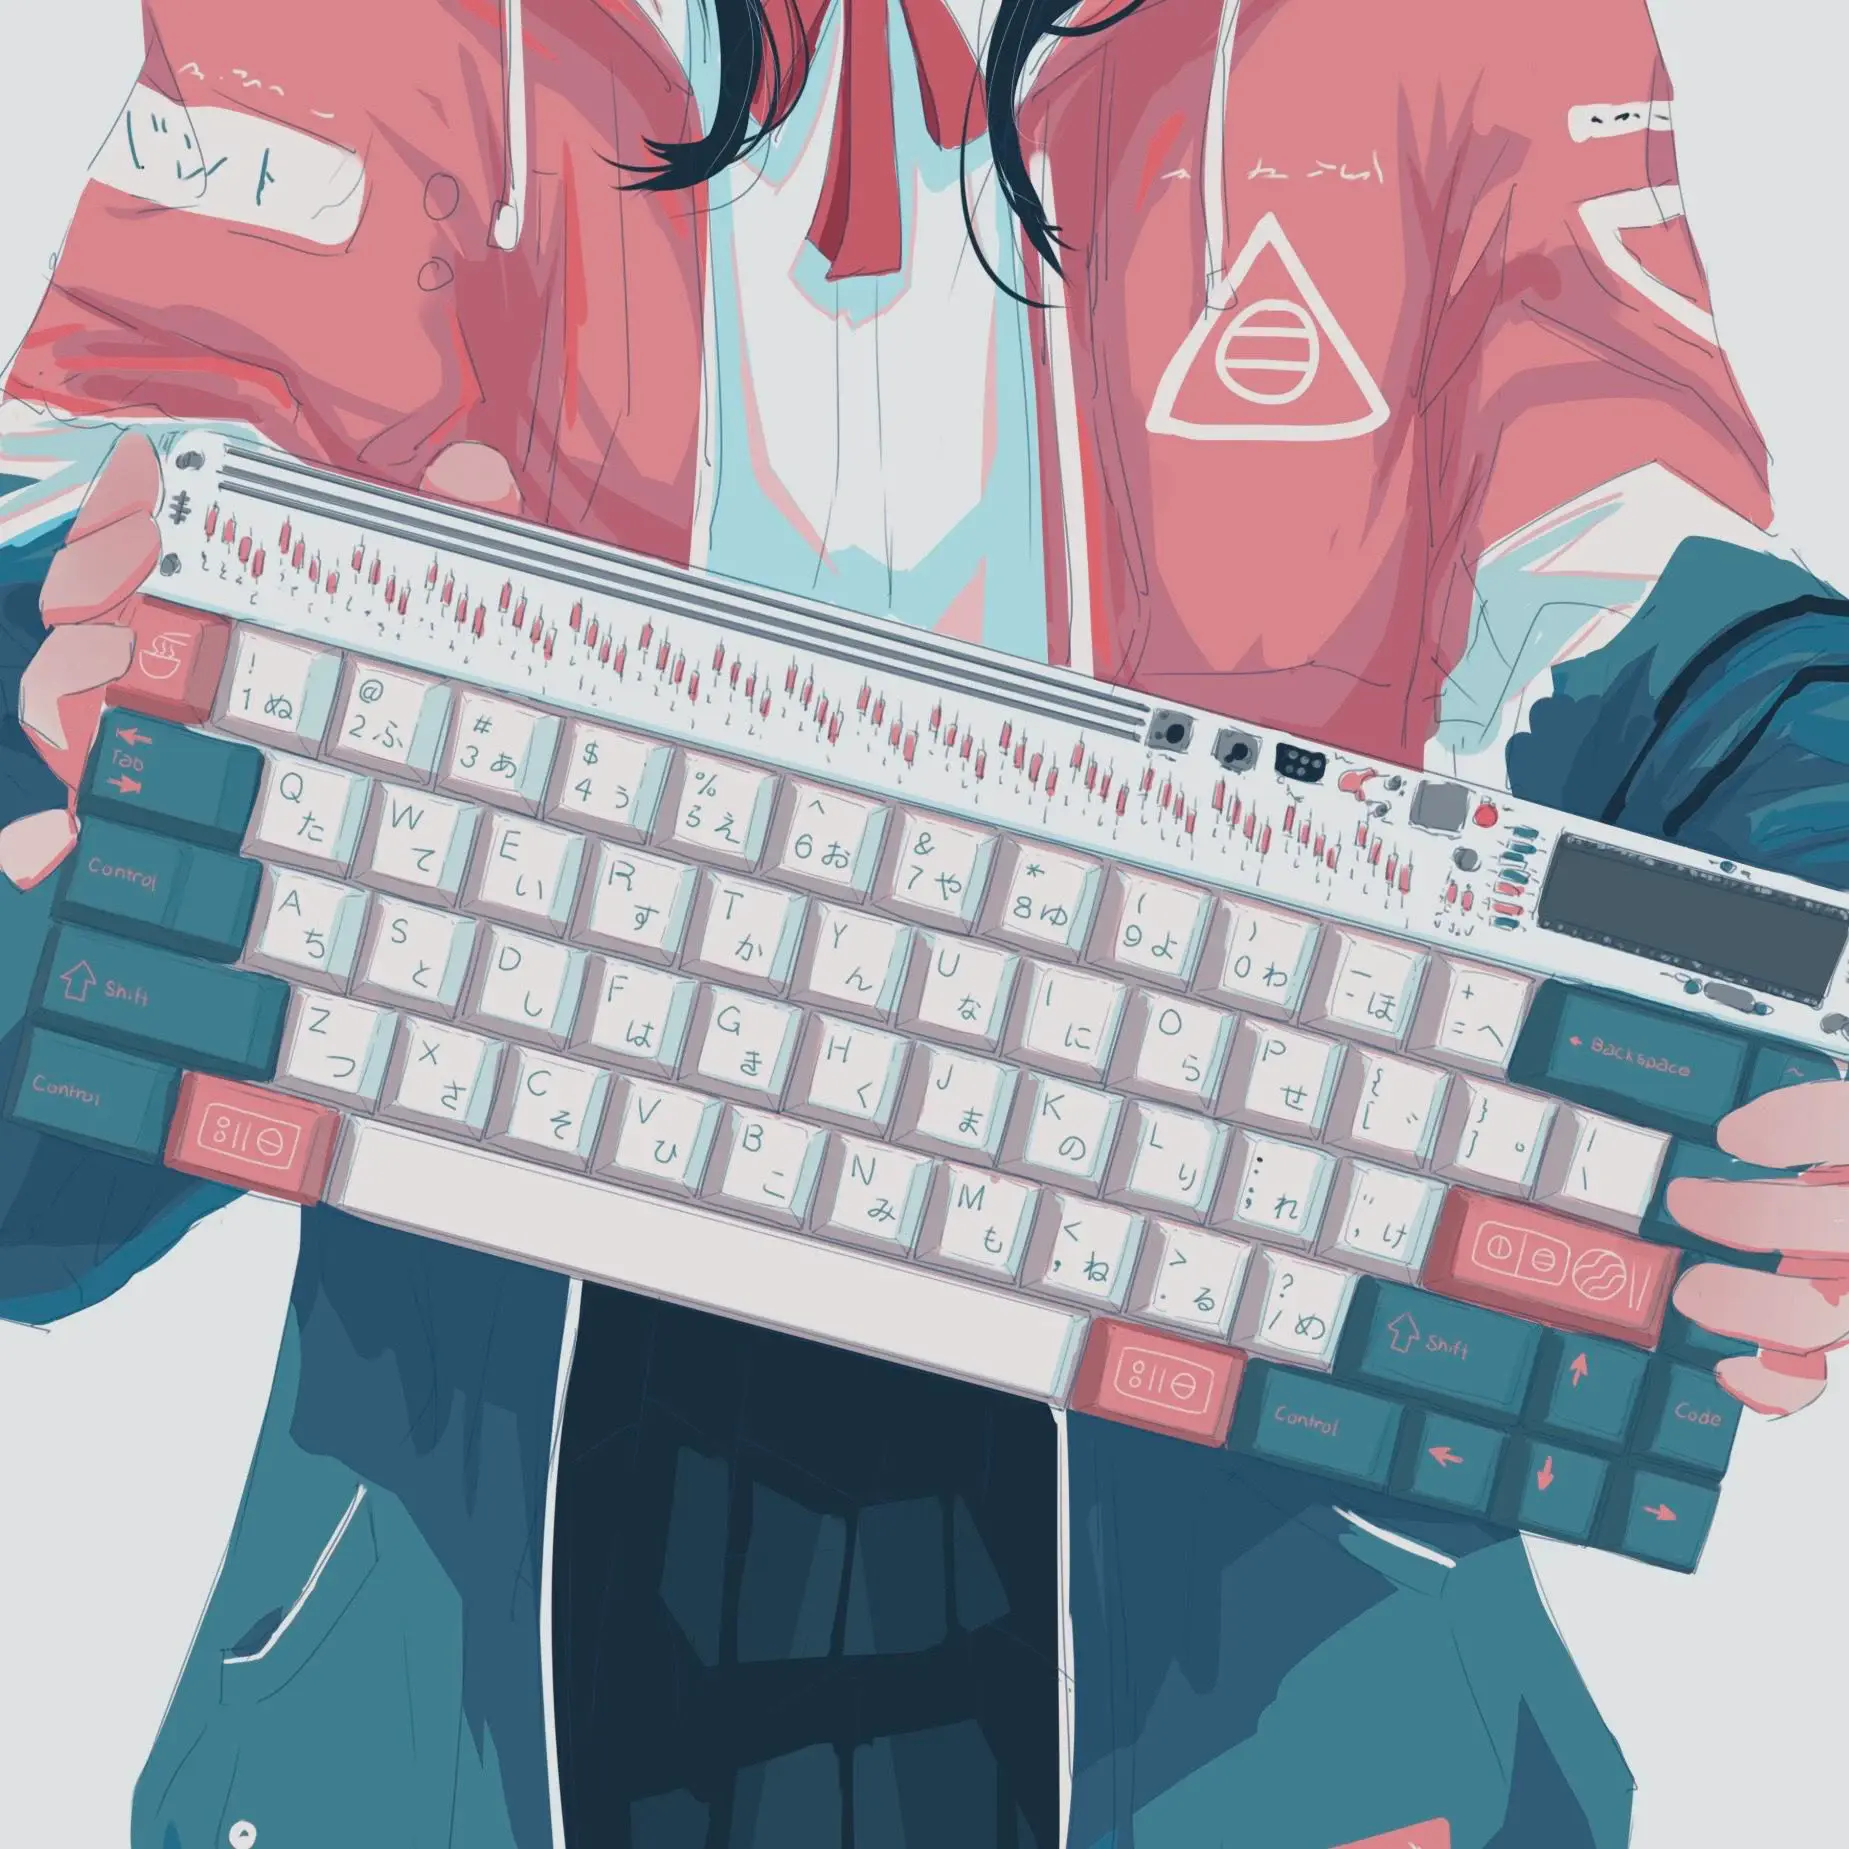 a drawing of a person holding a discipline keyboard with gmk bentō keycaps